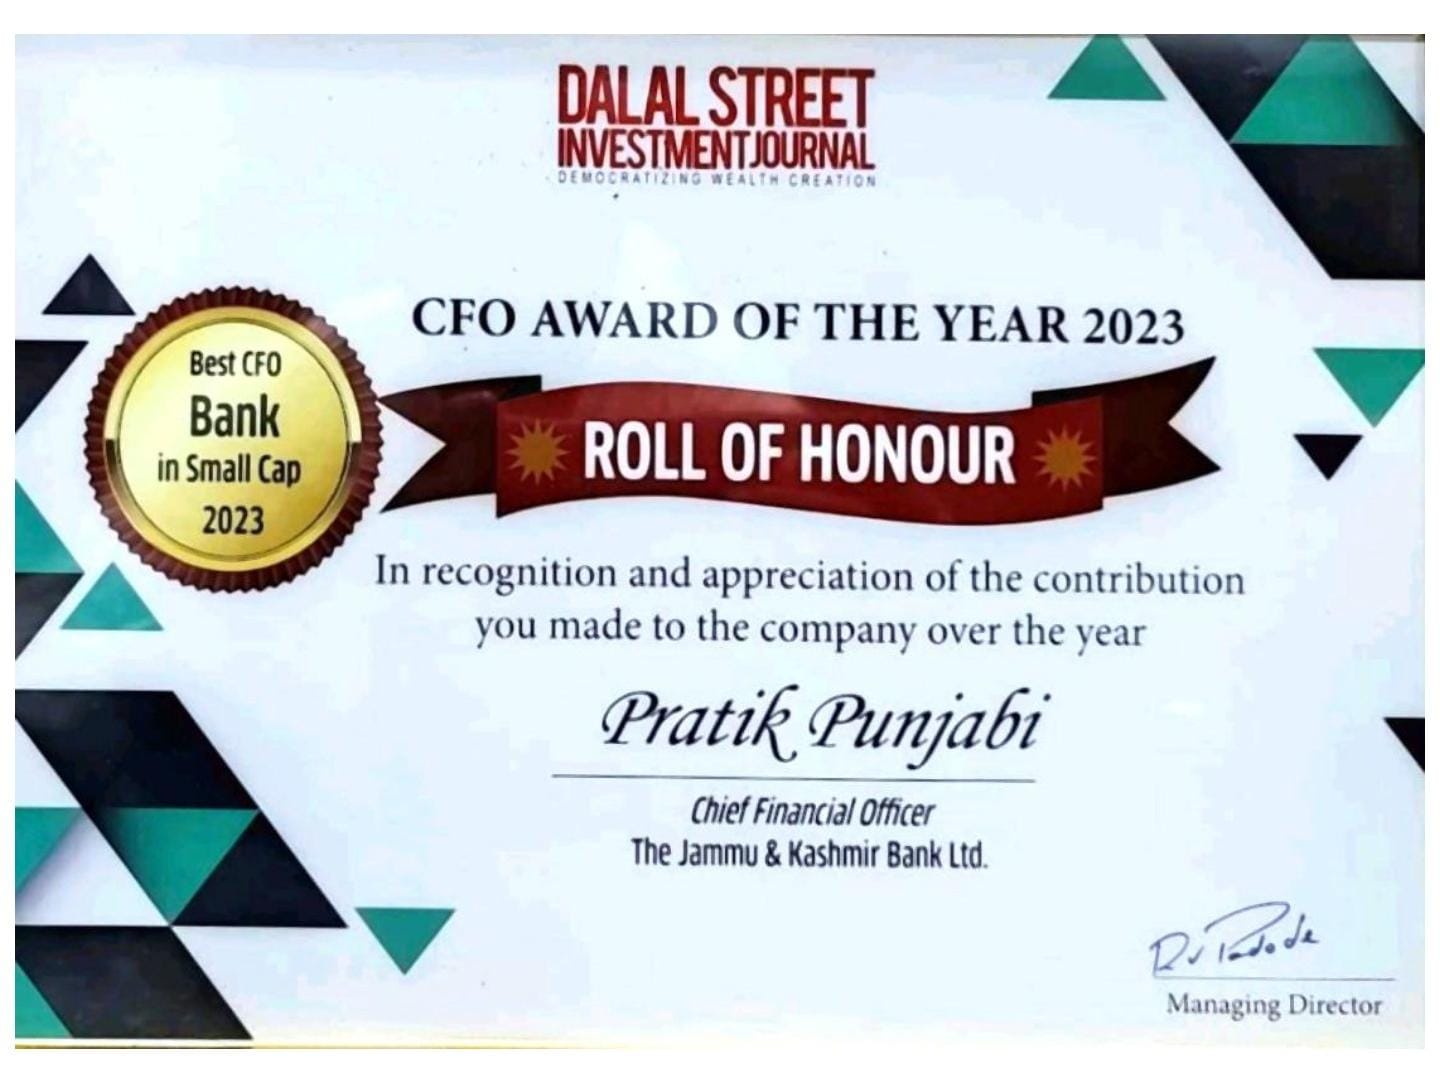 J&K Bank's Chief Financial Officer receives Best CFO Award of the Year 2023 ; An acknowledgement of the remarkable turnaround in the Bank’s financial performance: MD & CEO